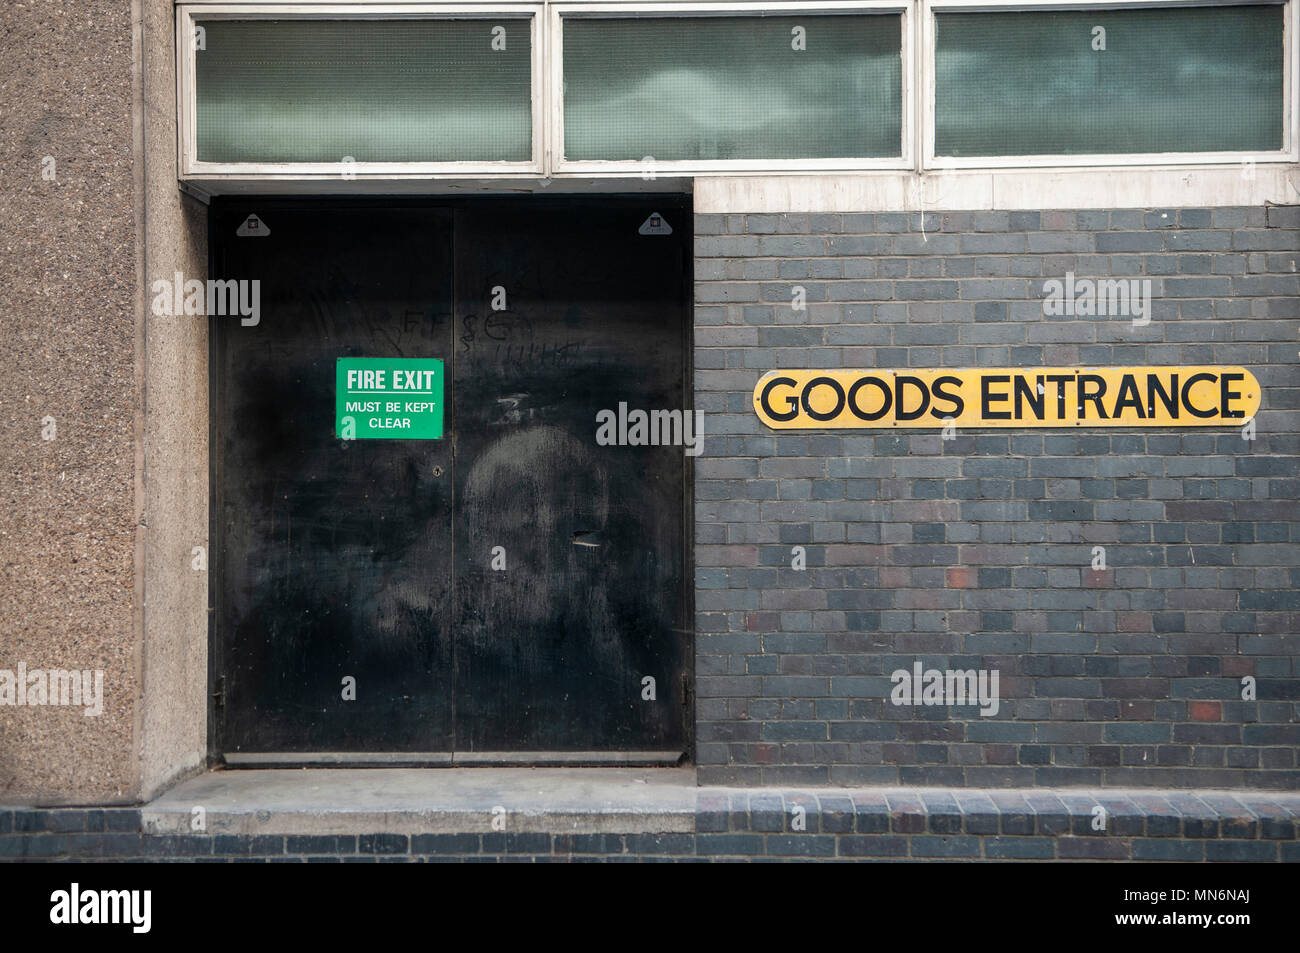 Goods entrance at the rear of a shop. Stock Photo